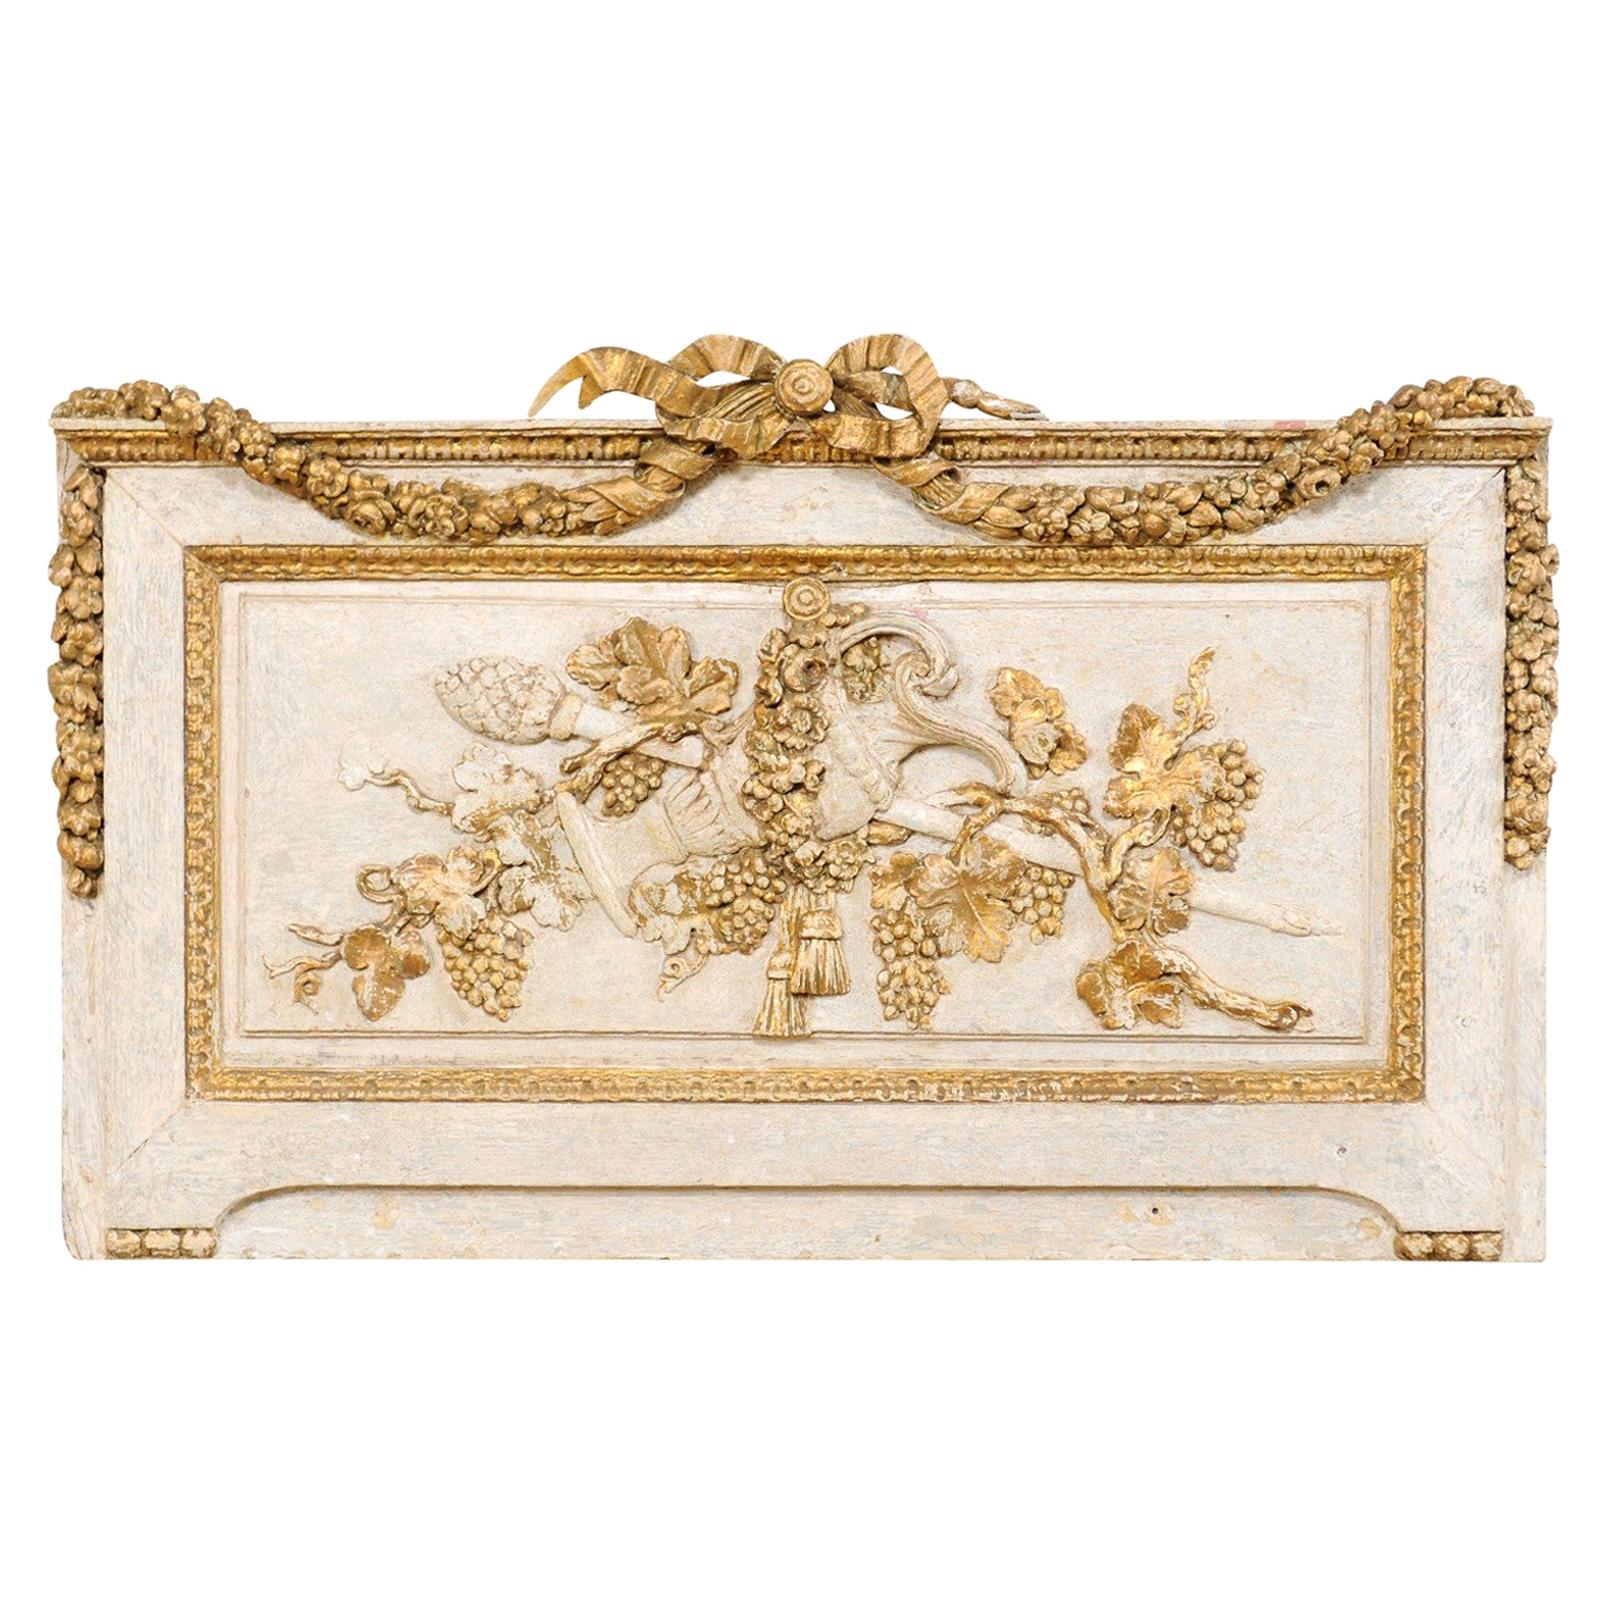 French Ribbon, Floral and Grapevine Carved Rectangular-Shaped Wall Plaque